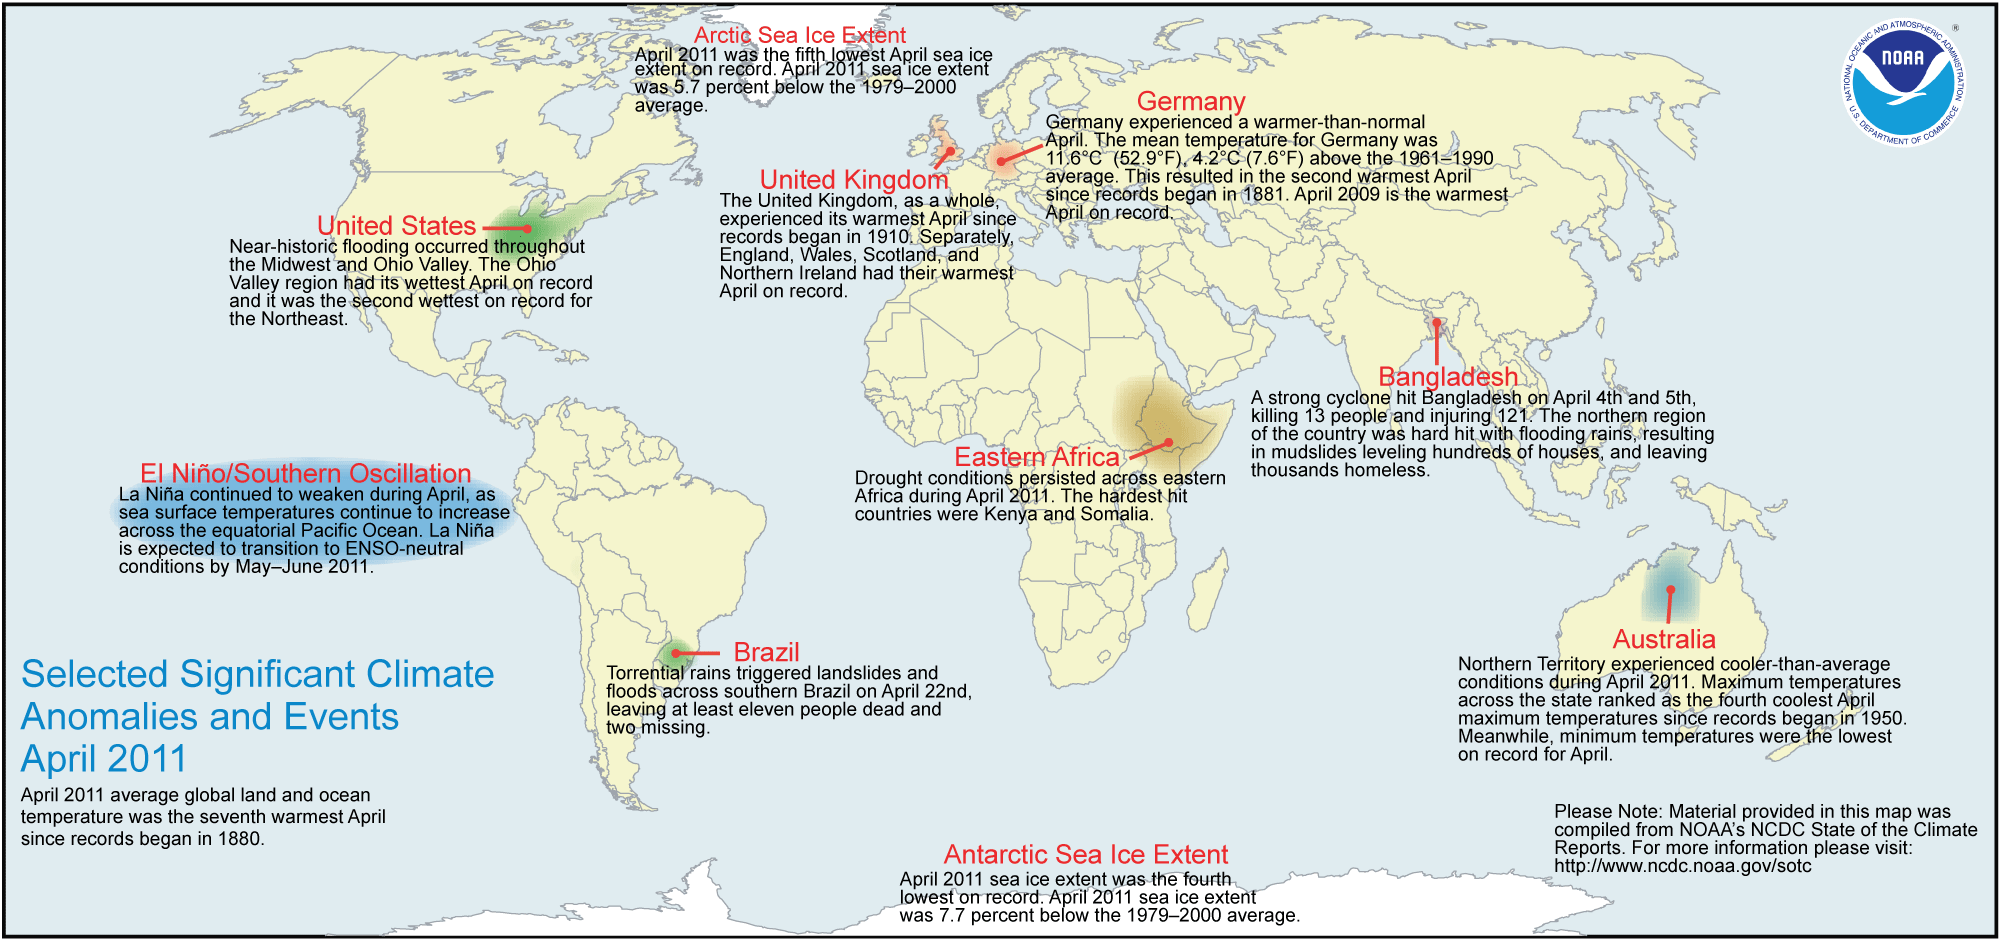 Selected Significant Climate Anomalies and Events, April 2011